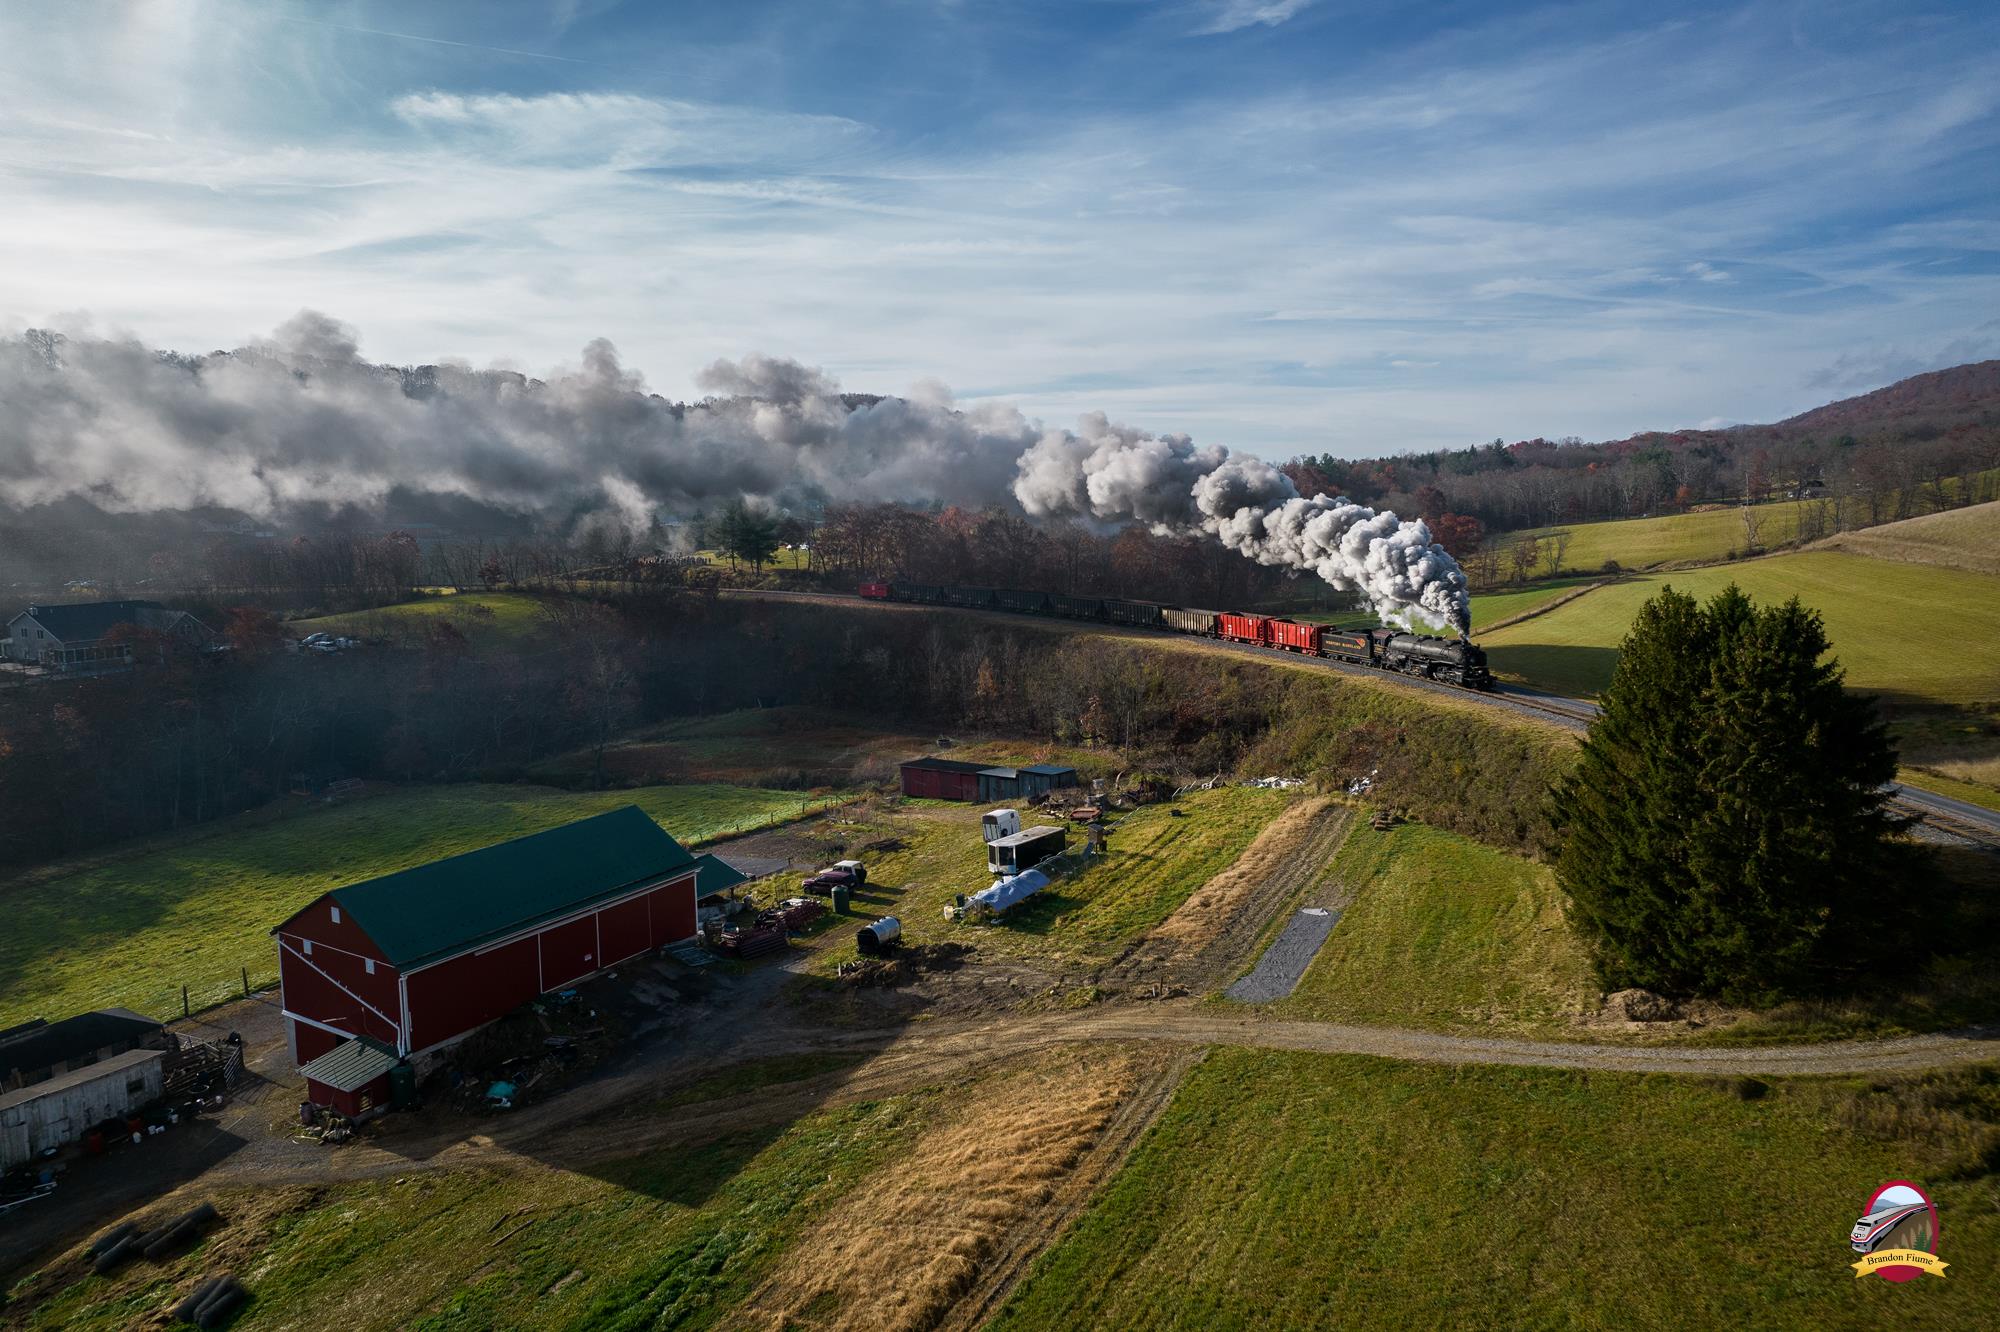 WMSR 1309 is a class Steam 2-6-6-2 and  is pictured in Corriganville, MD, USA.  This was taken along the N/A on the Western Maryland Scenic Railroad. Photo Copyright: Brandon Fiume uploaded to Railroad Gallery on 11/09/2022. This photograph of WMSR 1309 was taken on Saturday, November 05, 2022. All Rights Reserved. 